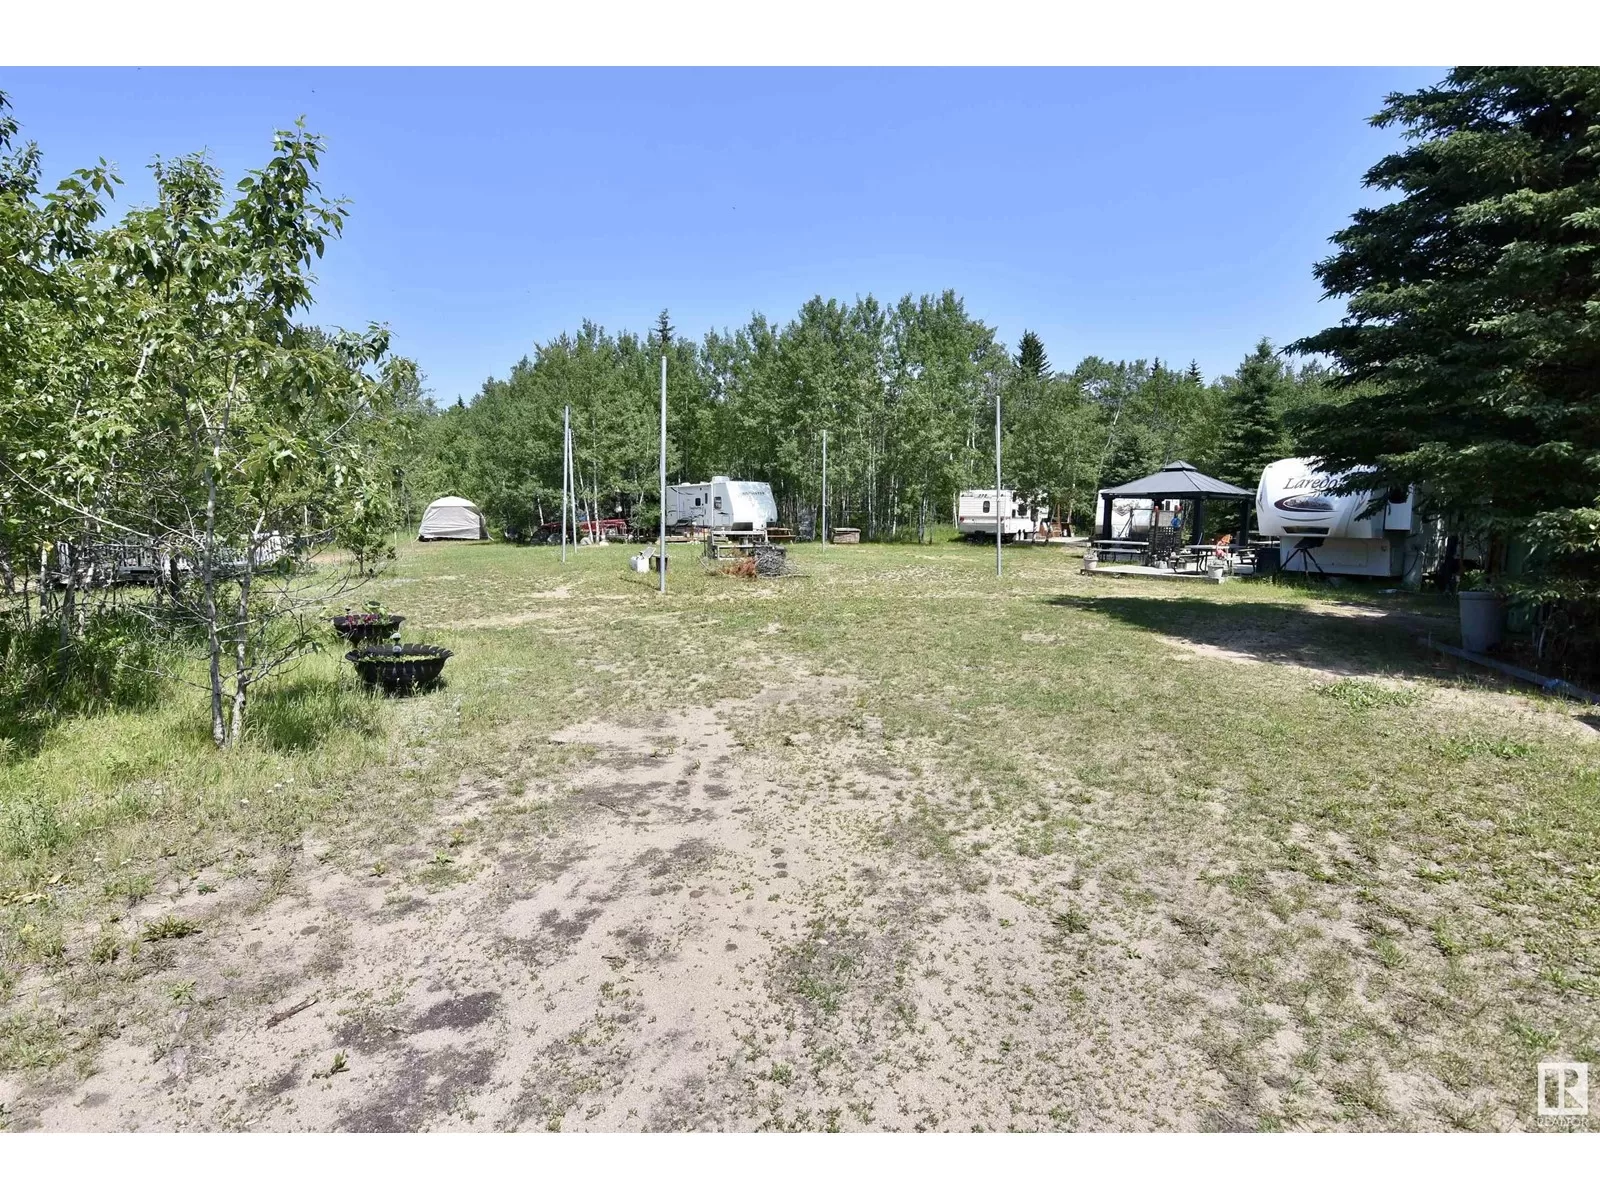 No Building for rent: 14374 Hwy 652, Rural Smoky Lake County, Alberta T0A 3L0